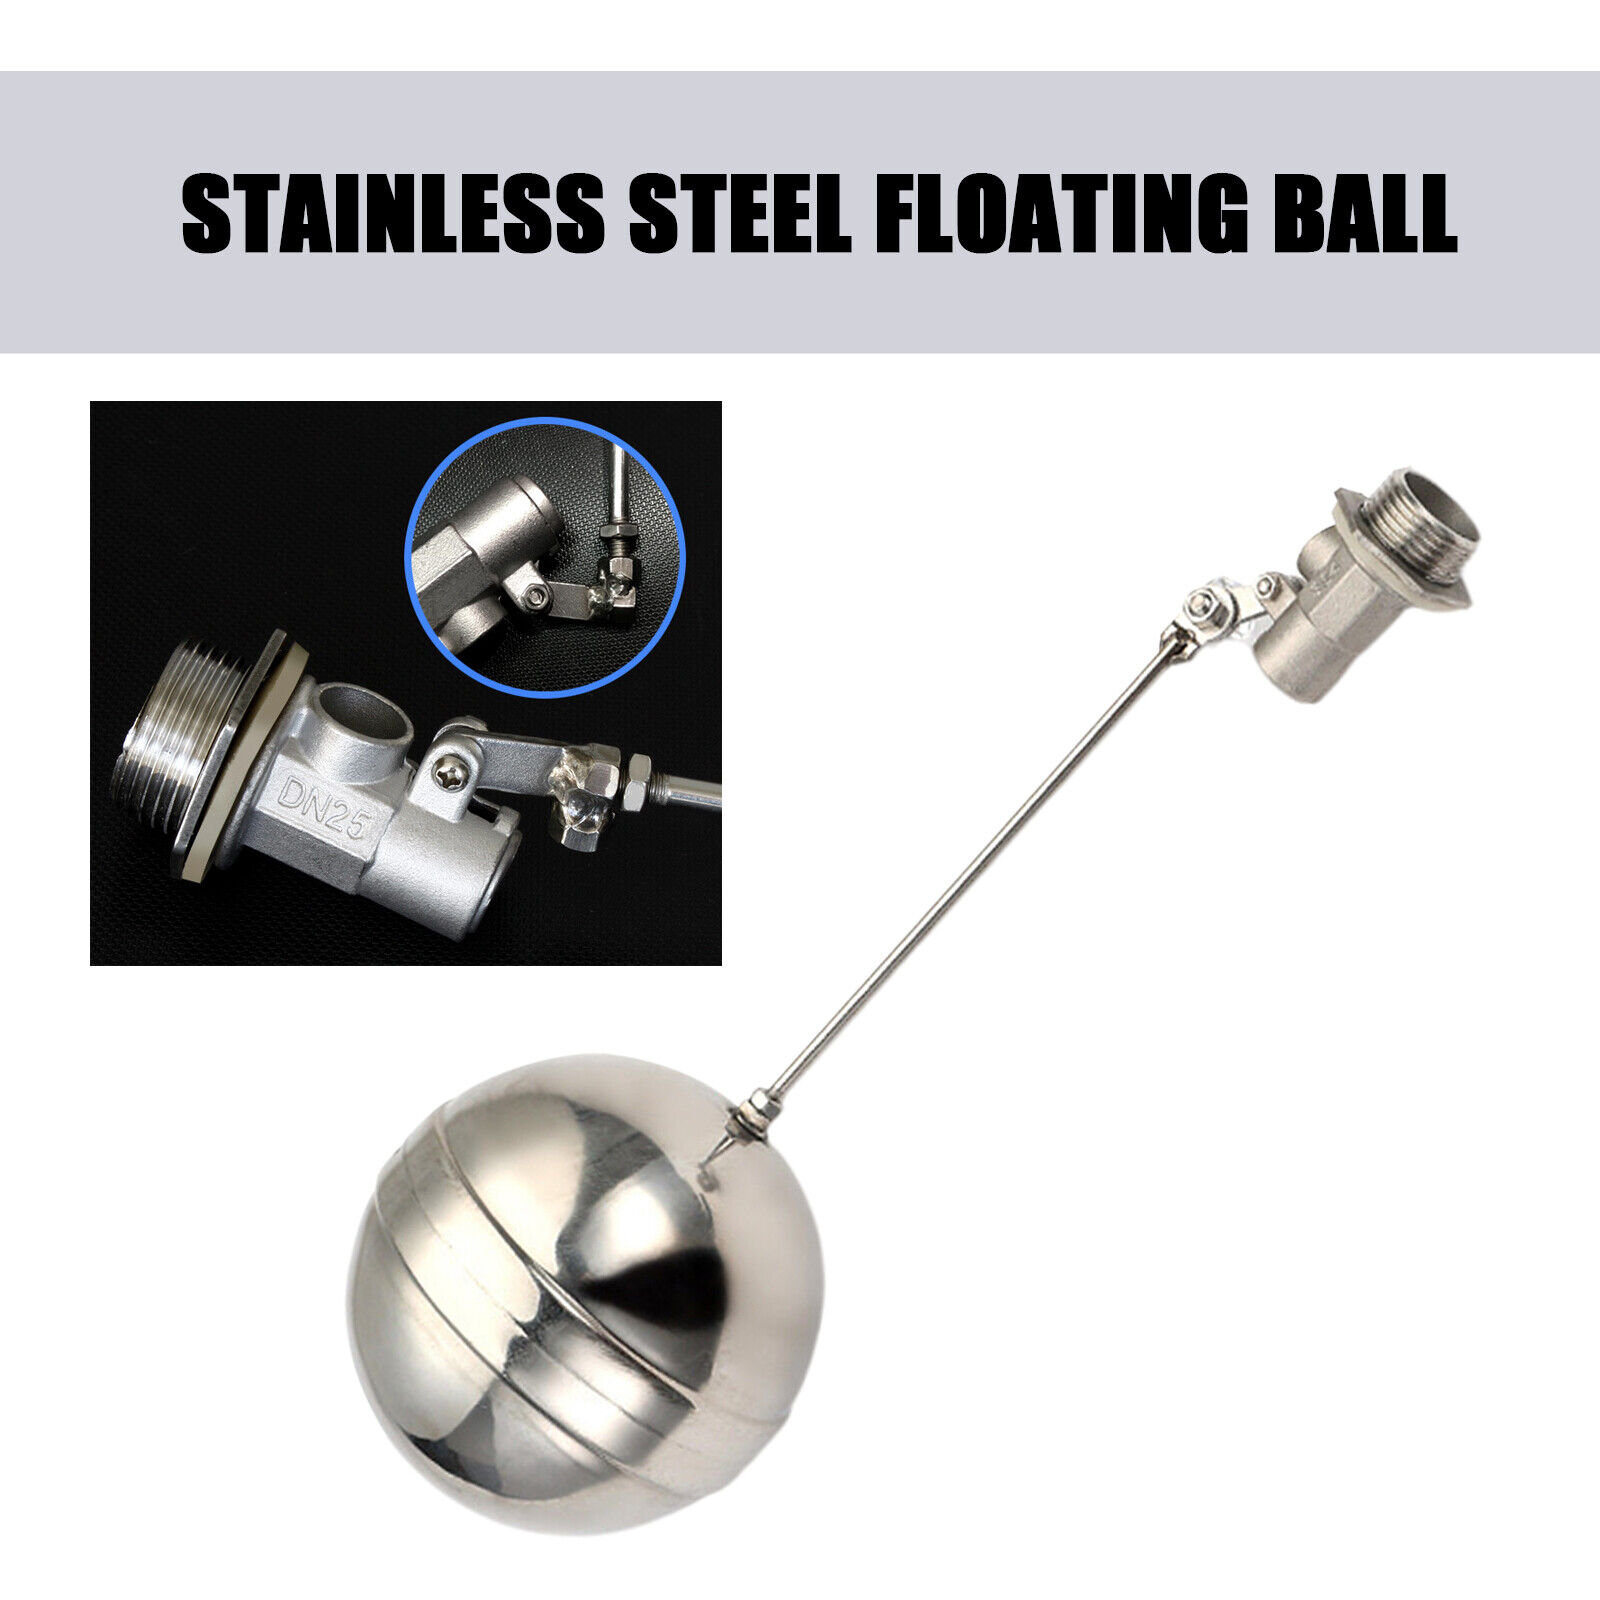 Dn15 1/2" Floating Ball Valve Stainless Steel Adjustable Water Level Tank Tool